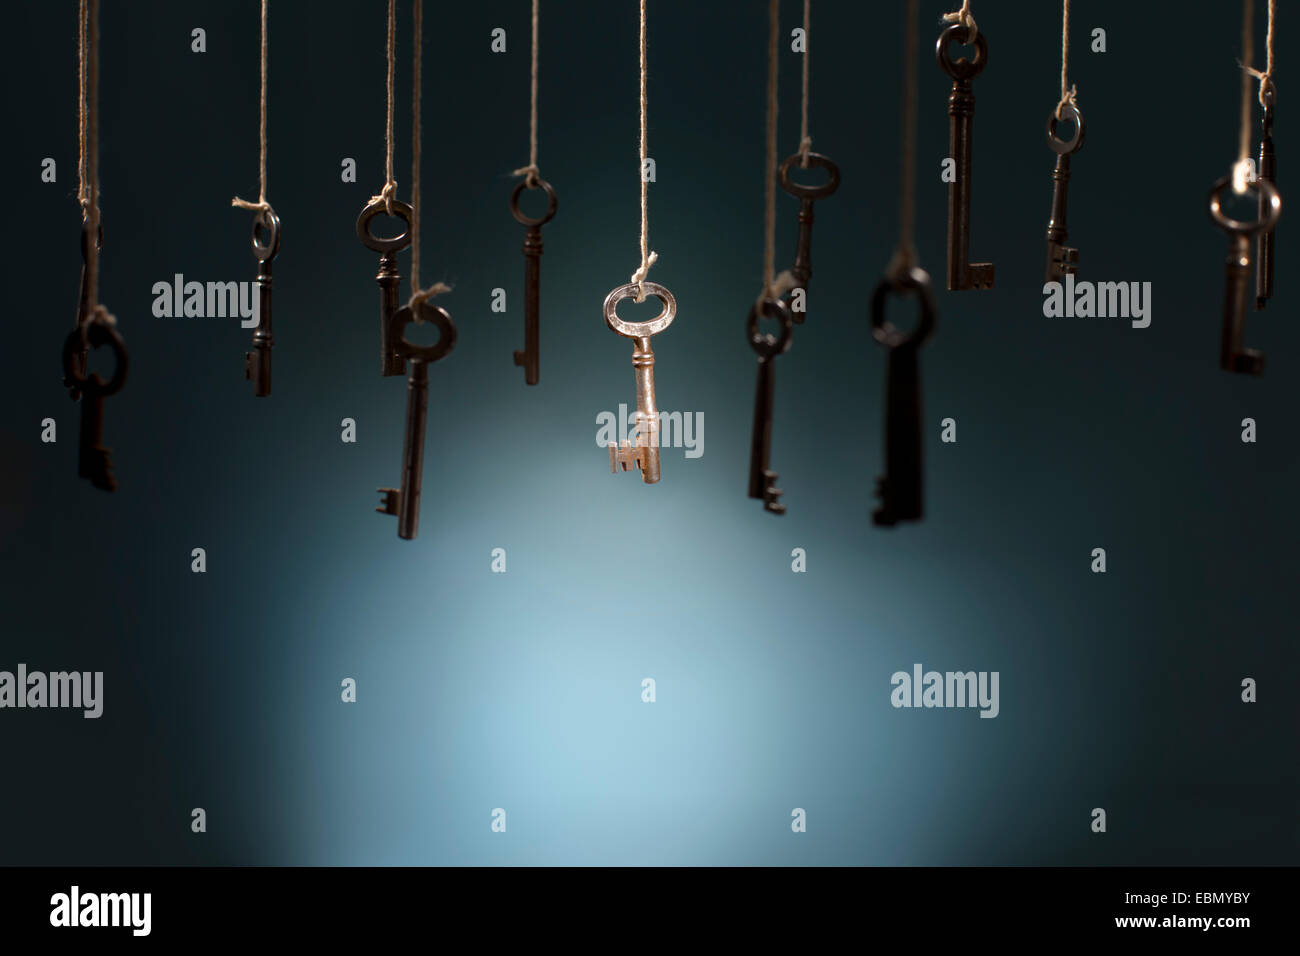 Old keys hanging on strings. One key in the middle is in spotlight focus. Stock Photo